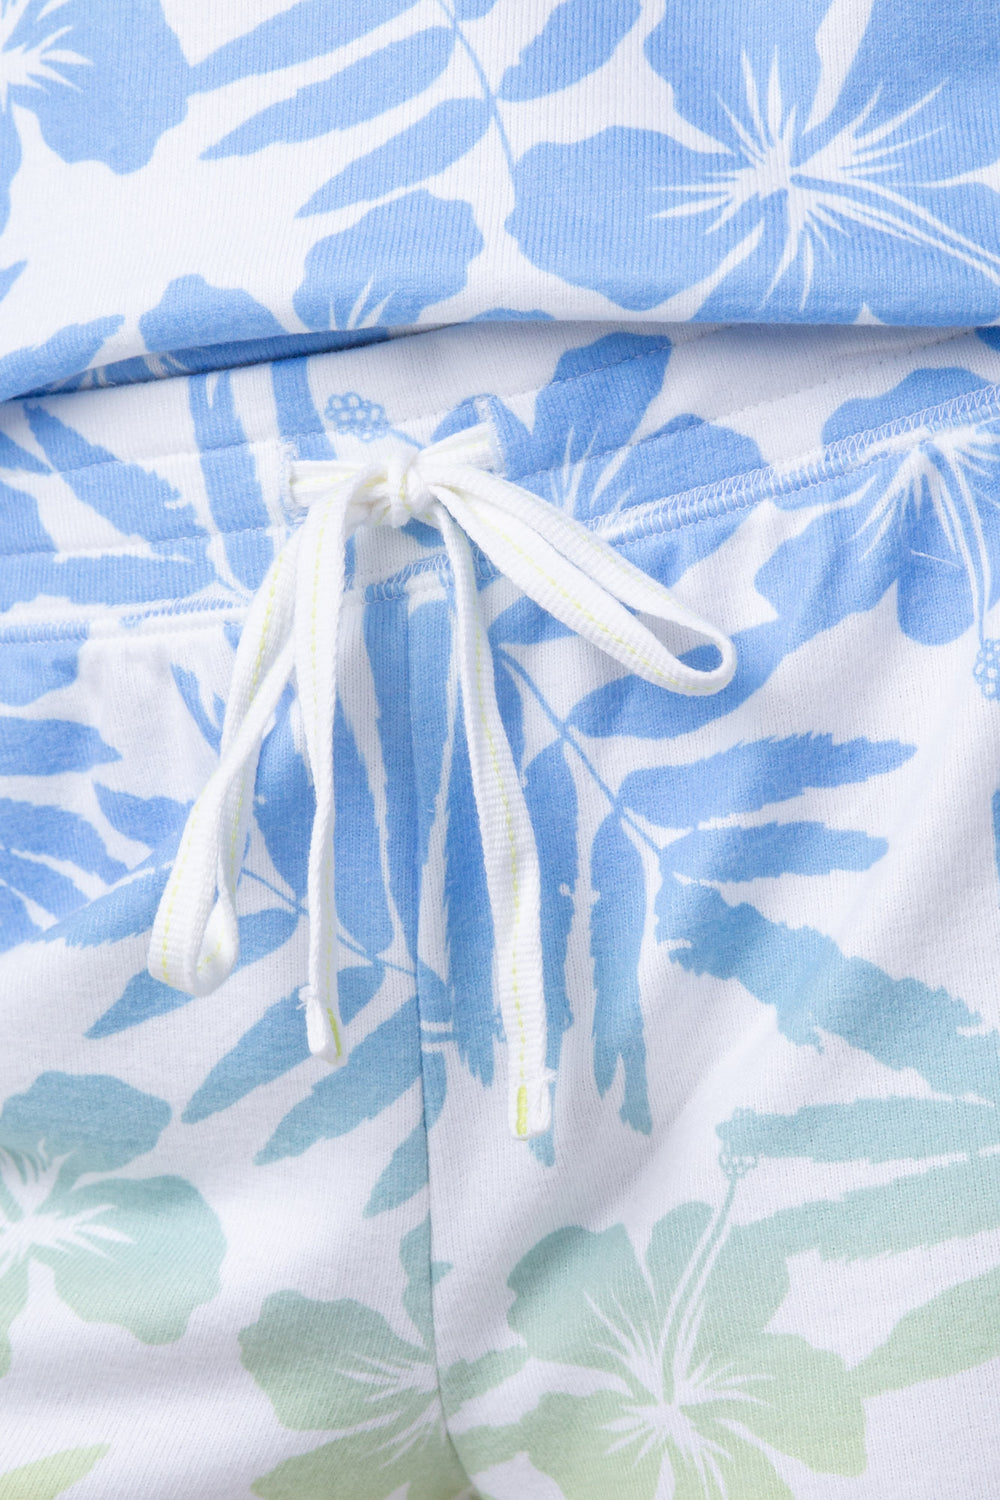 Women's lounge short in ivory-blue-green tropical print with tie waist.